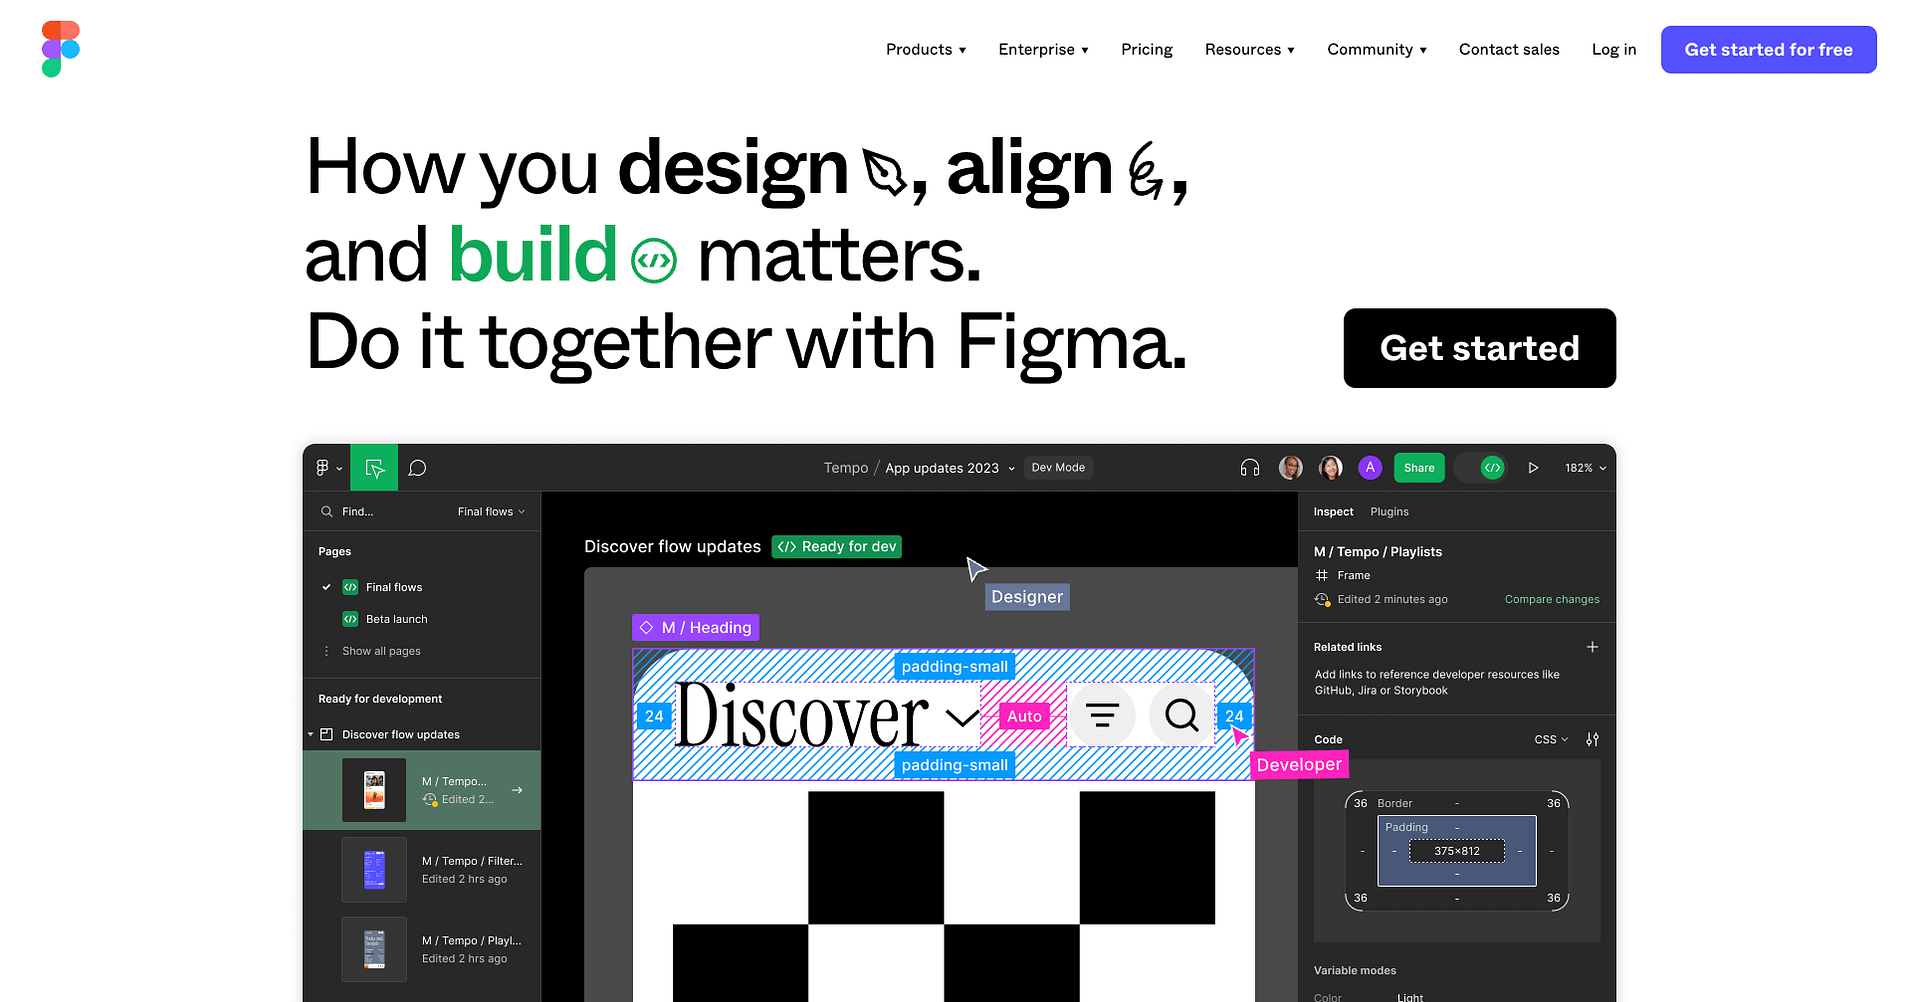 Figma is among the best web design tool options available.